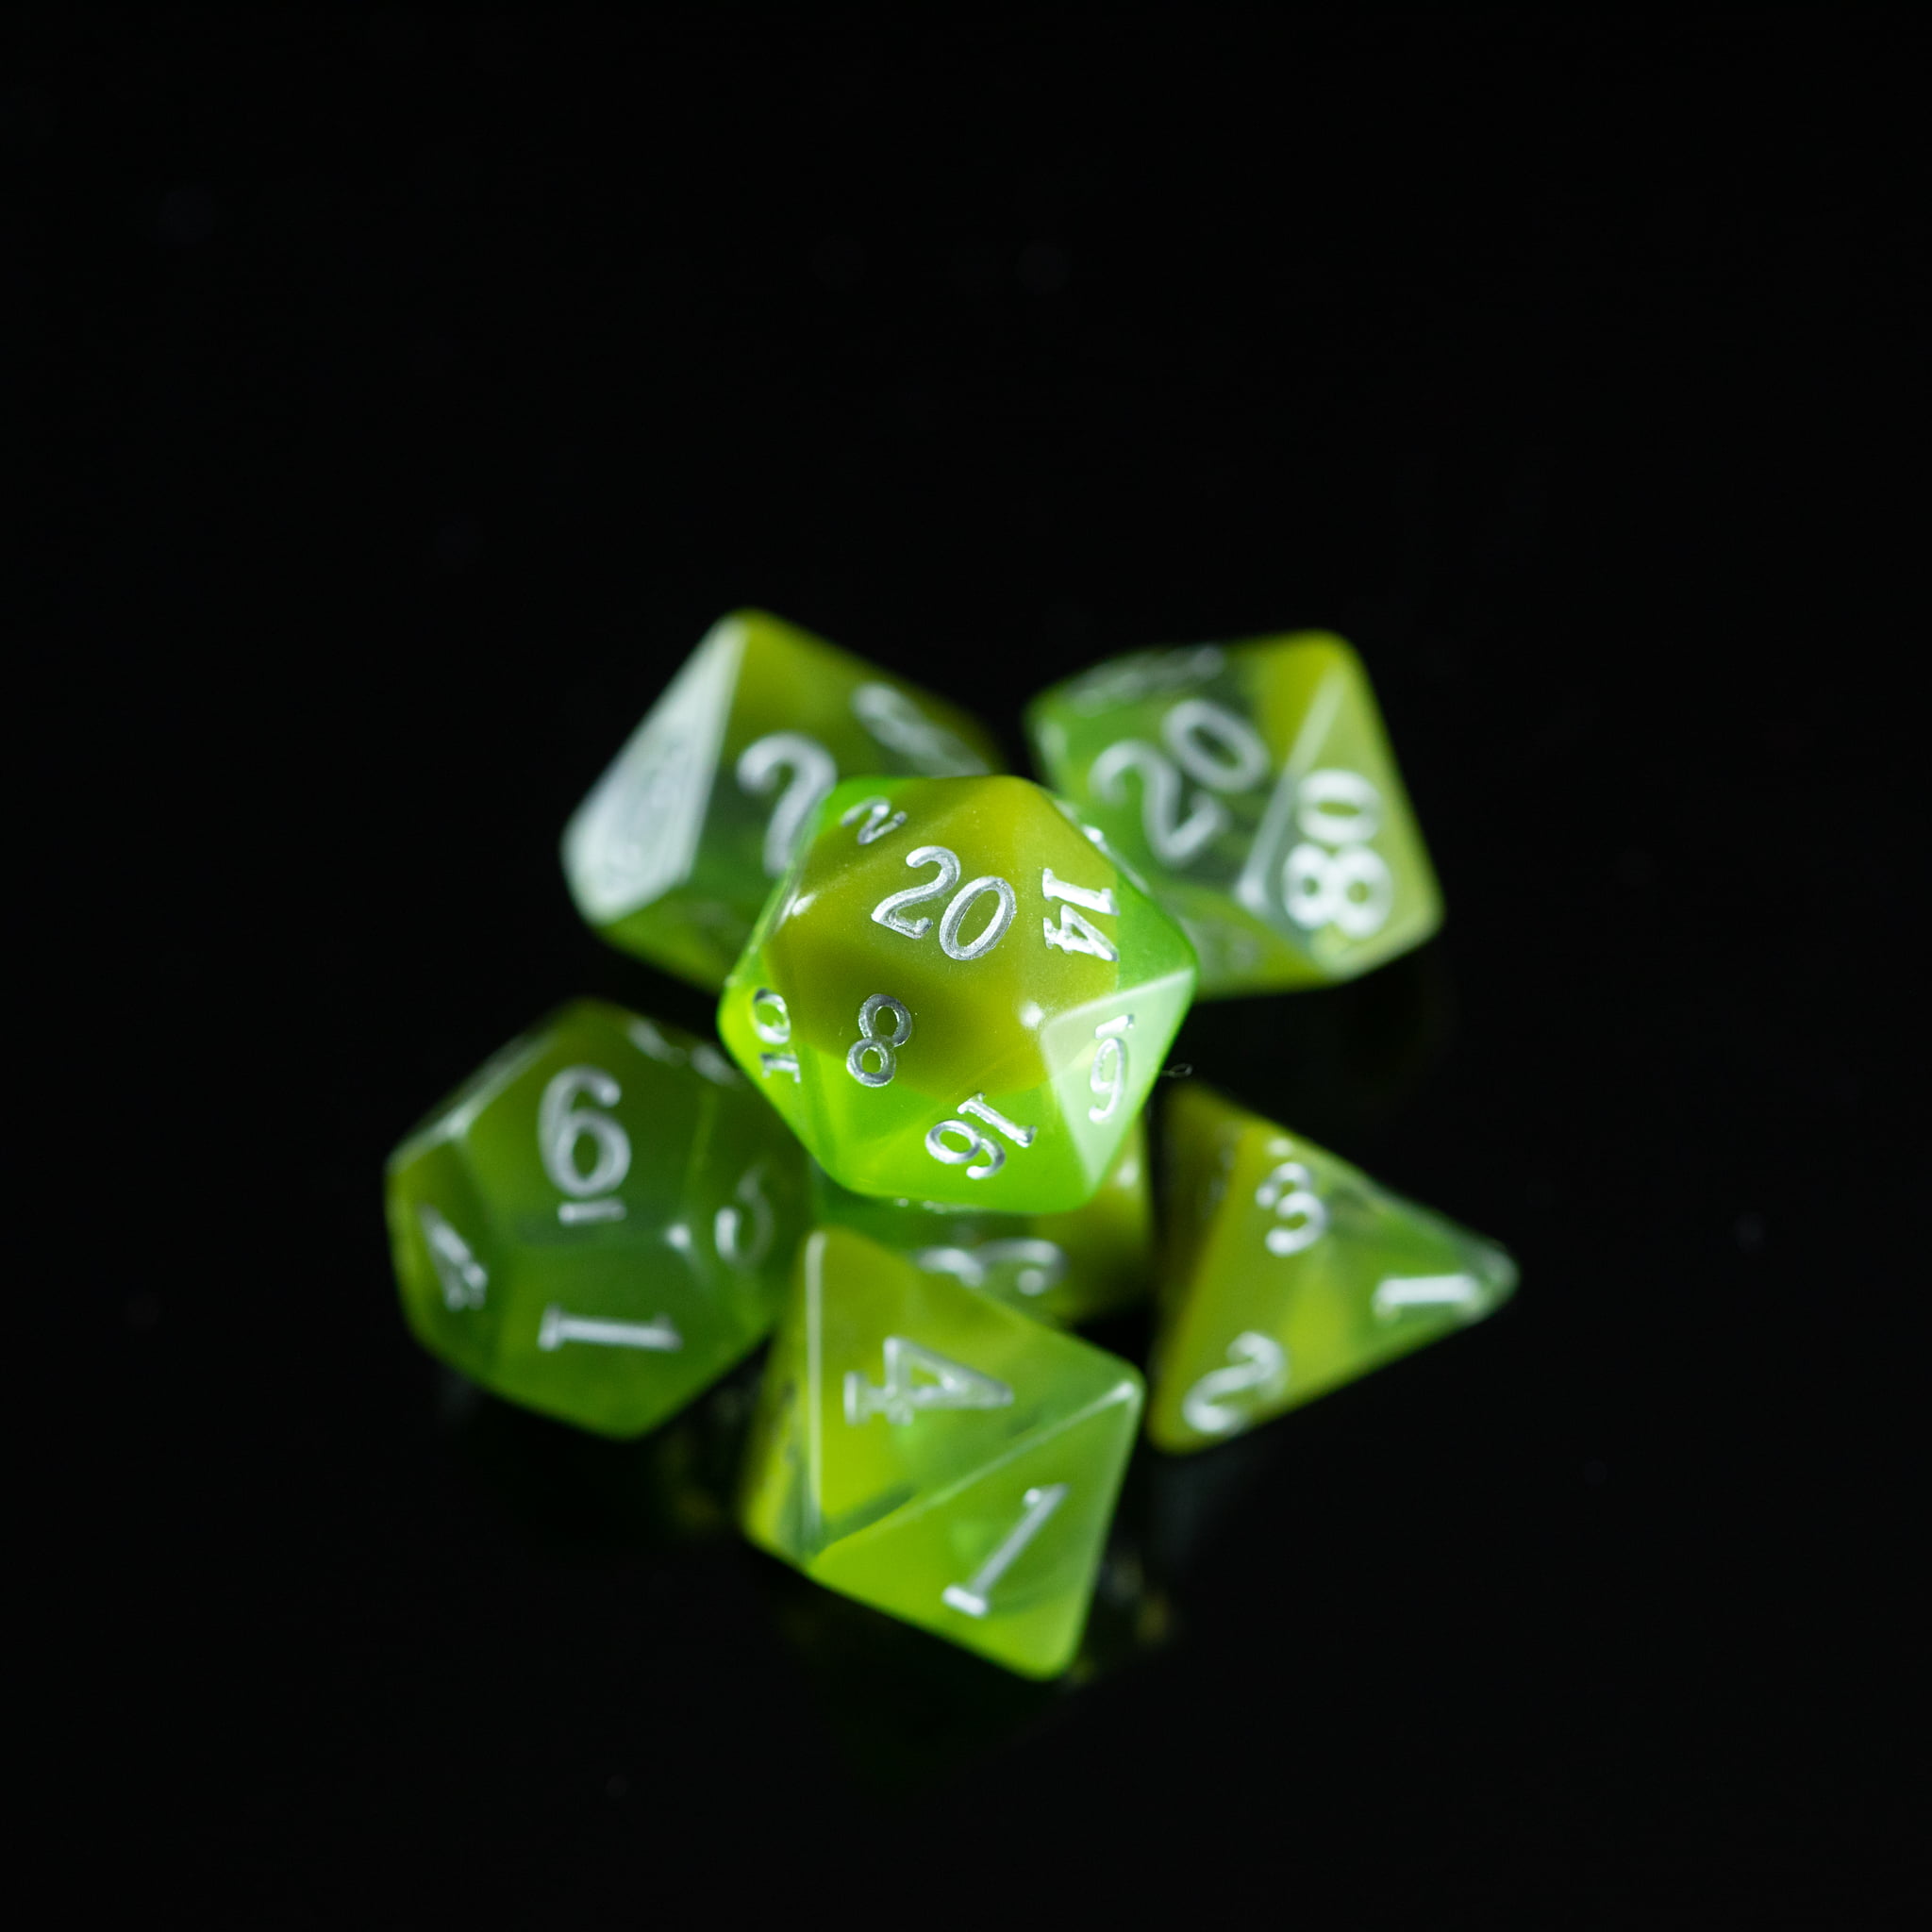 Pearl Poly 7 Dice RPG Set Light Green White Pathfinder Dungeon Dragon D&D DND HD 